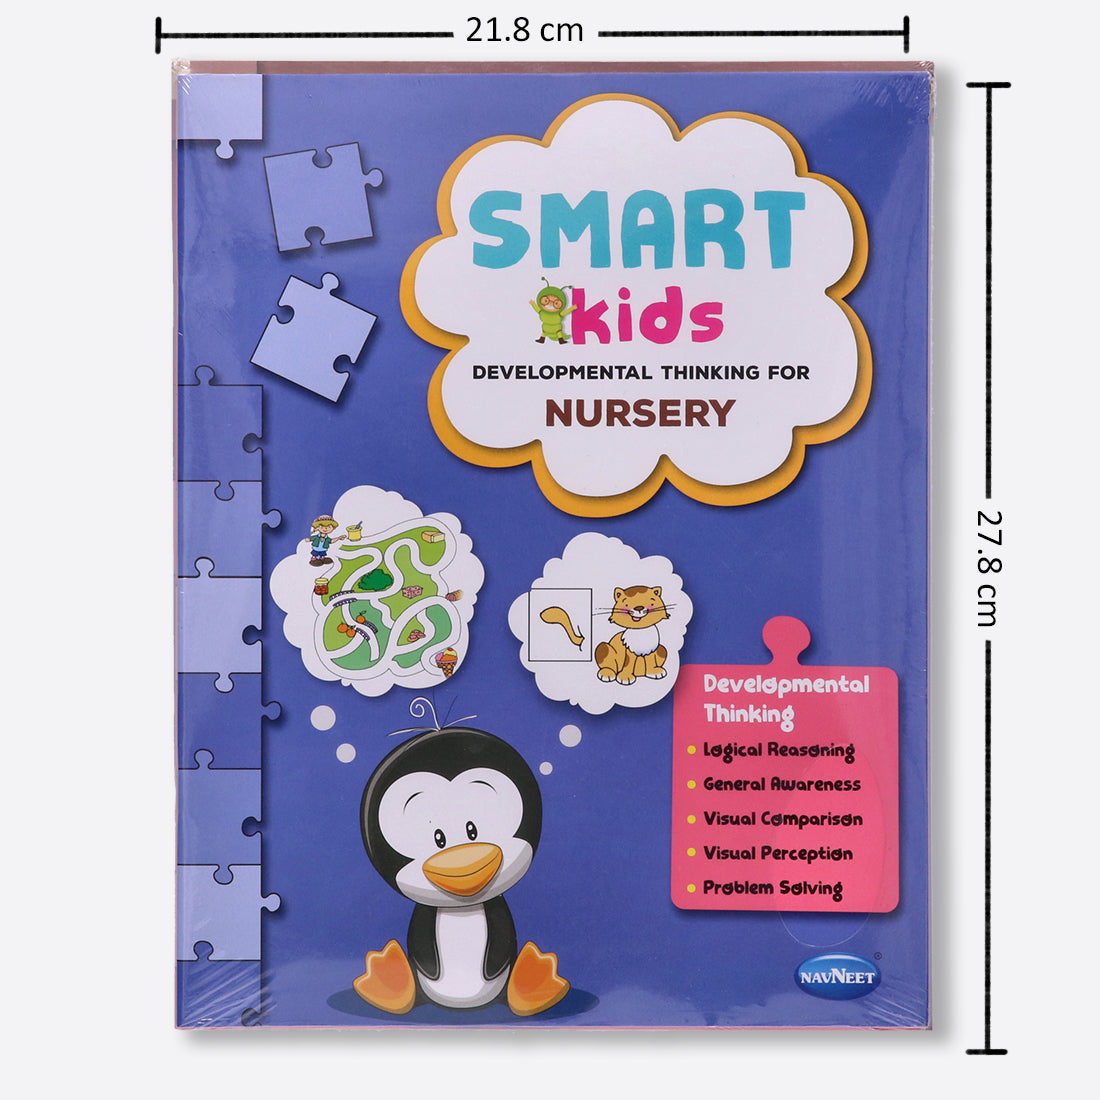 Navneet Smart Kids Activity Book for Nursery Kids- Develops Developmental Thinking, Pre-Reading Skills, Pre-Writing Skills, Pre-Math Skills- Learning and Education- Pack of 4